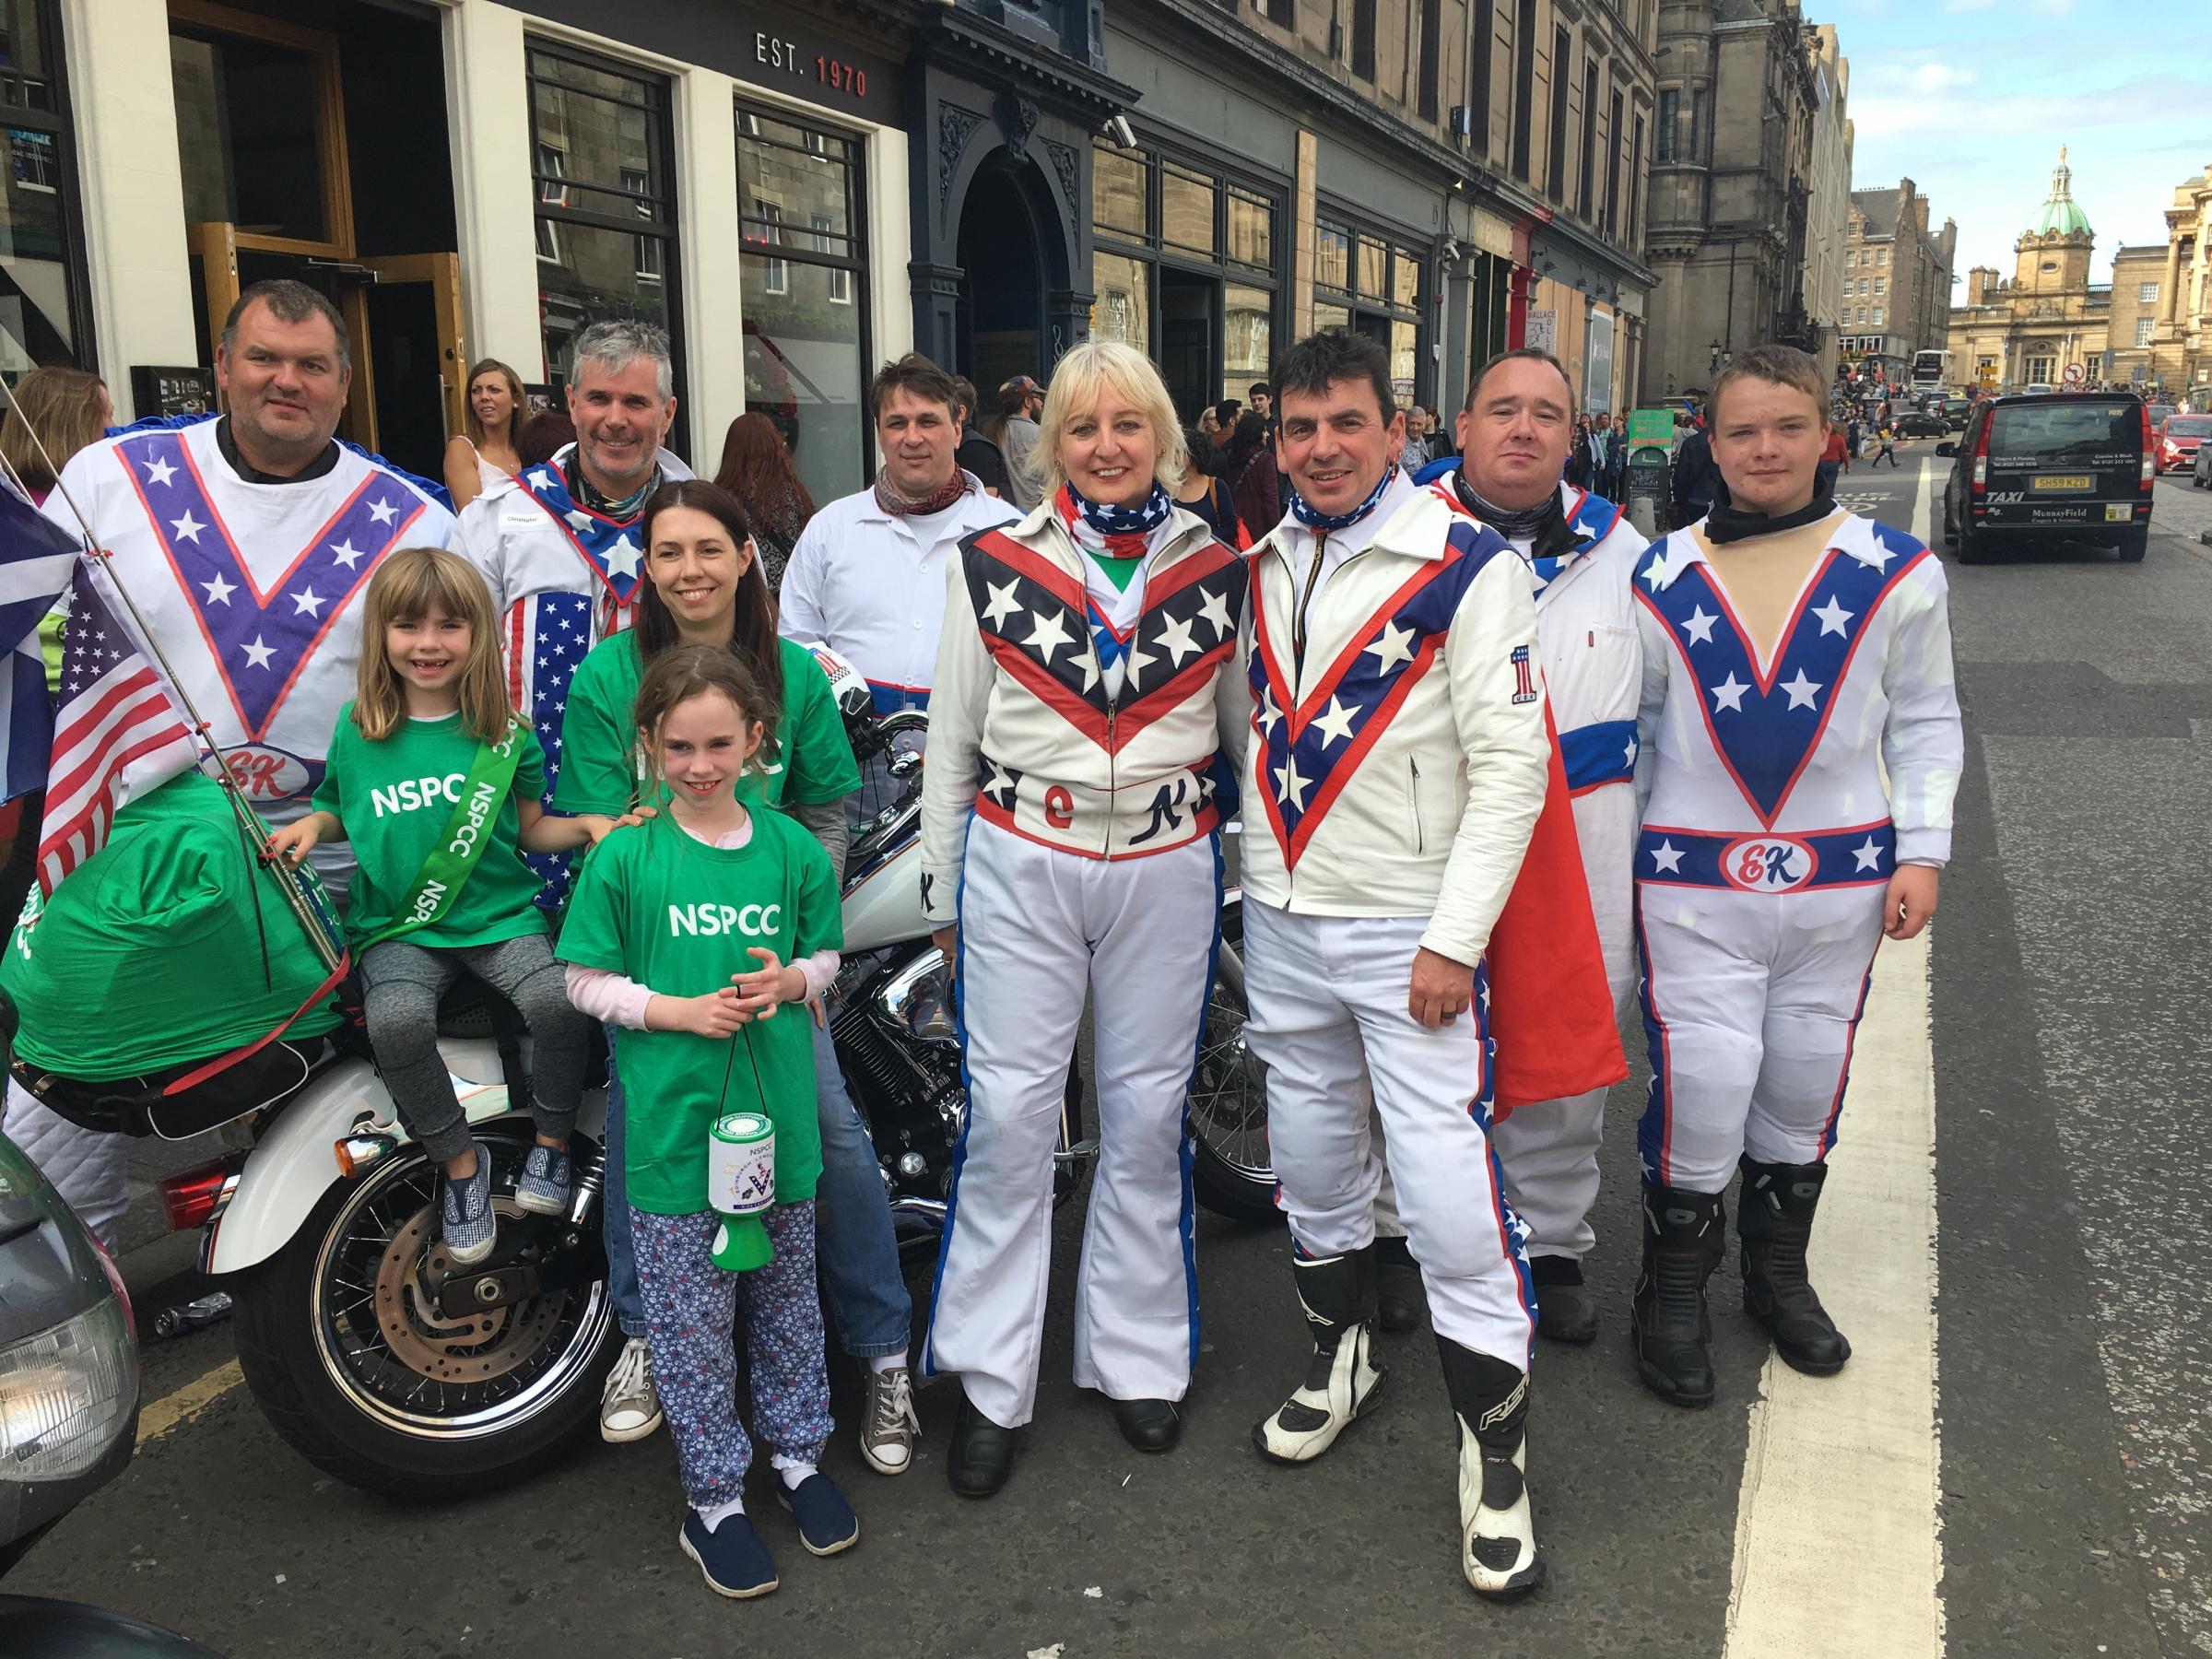 Members of the Cymru Knievels pictured at an event in 2017, which was also held in aid of the NSPCC. 